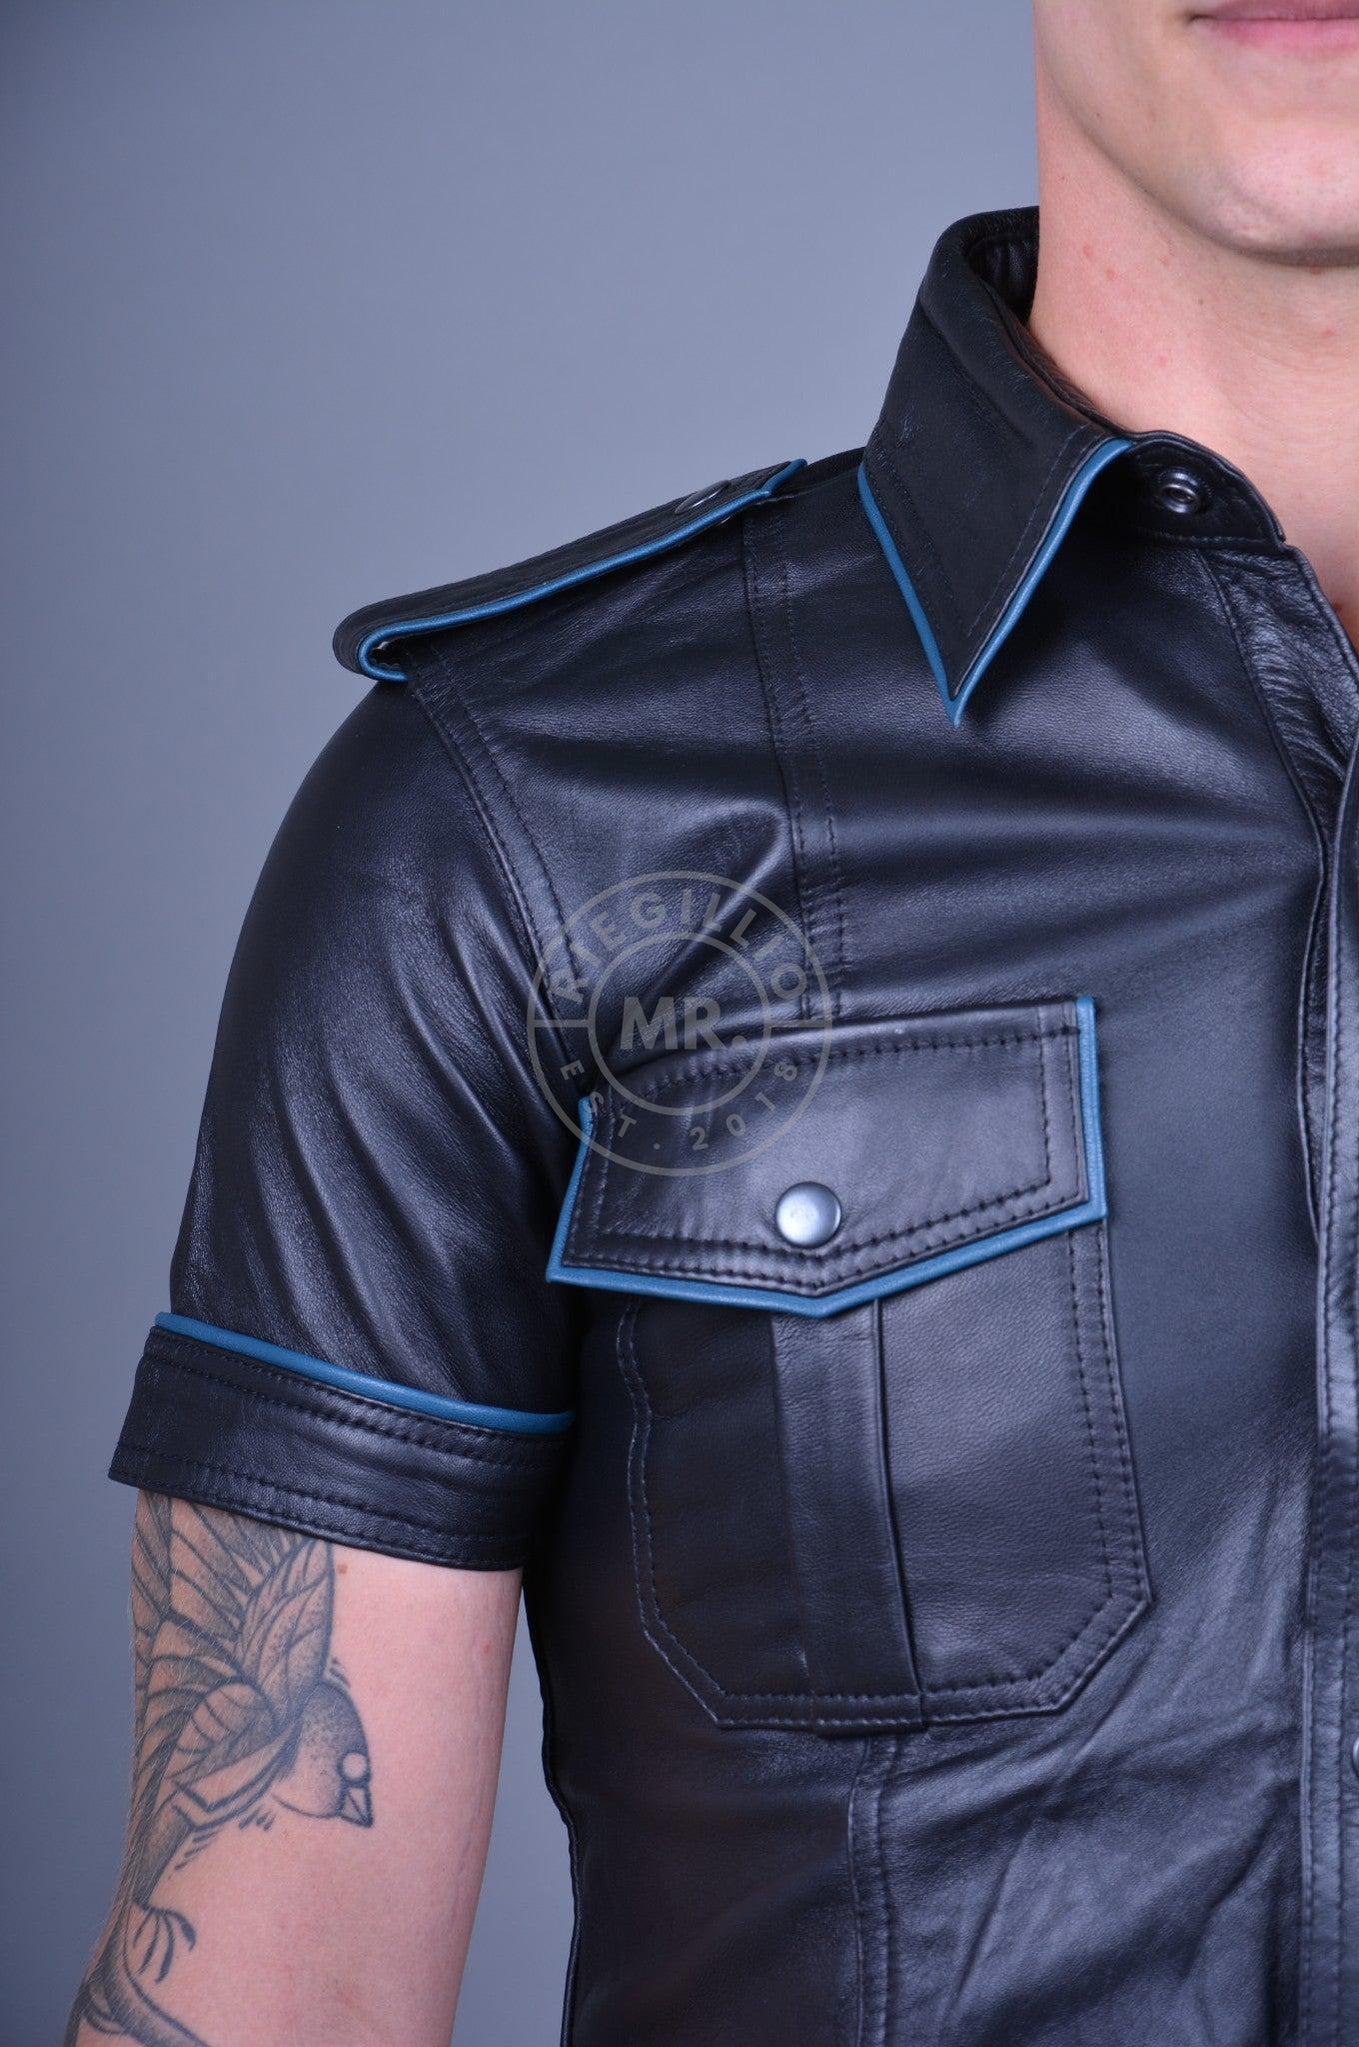 Black Leather Shirt - JEANS BLUE Piping-at MR. Riegillio